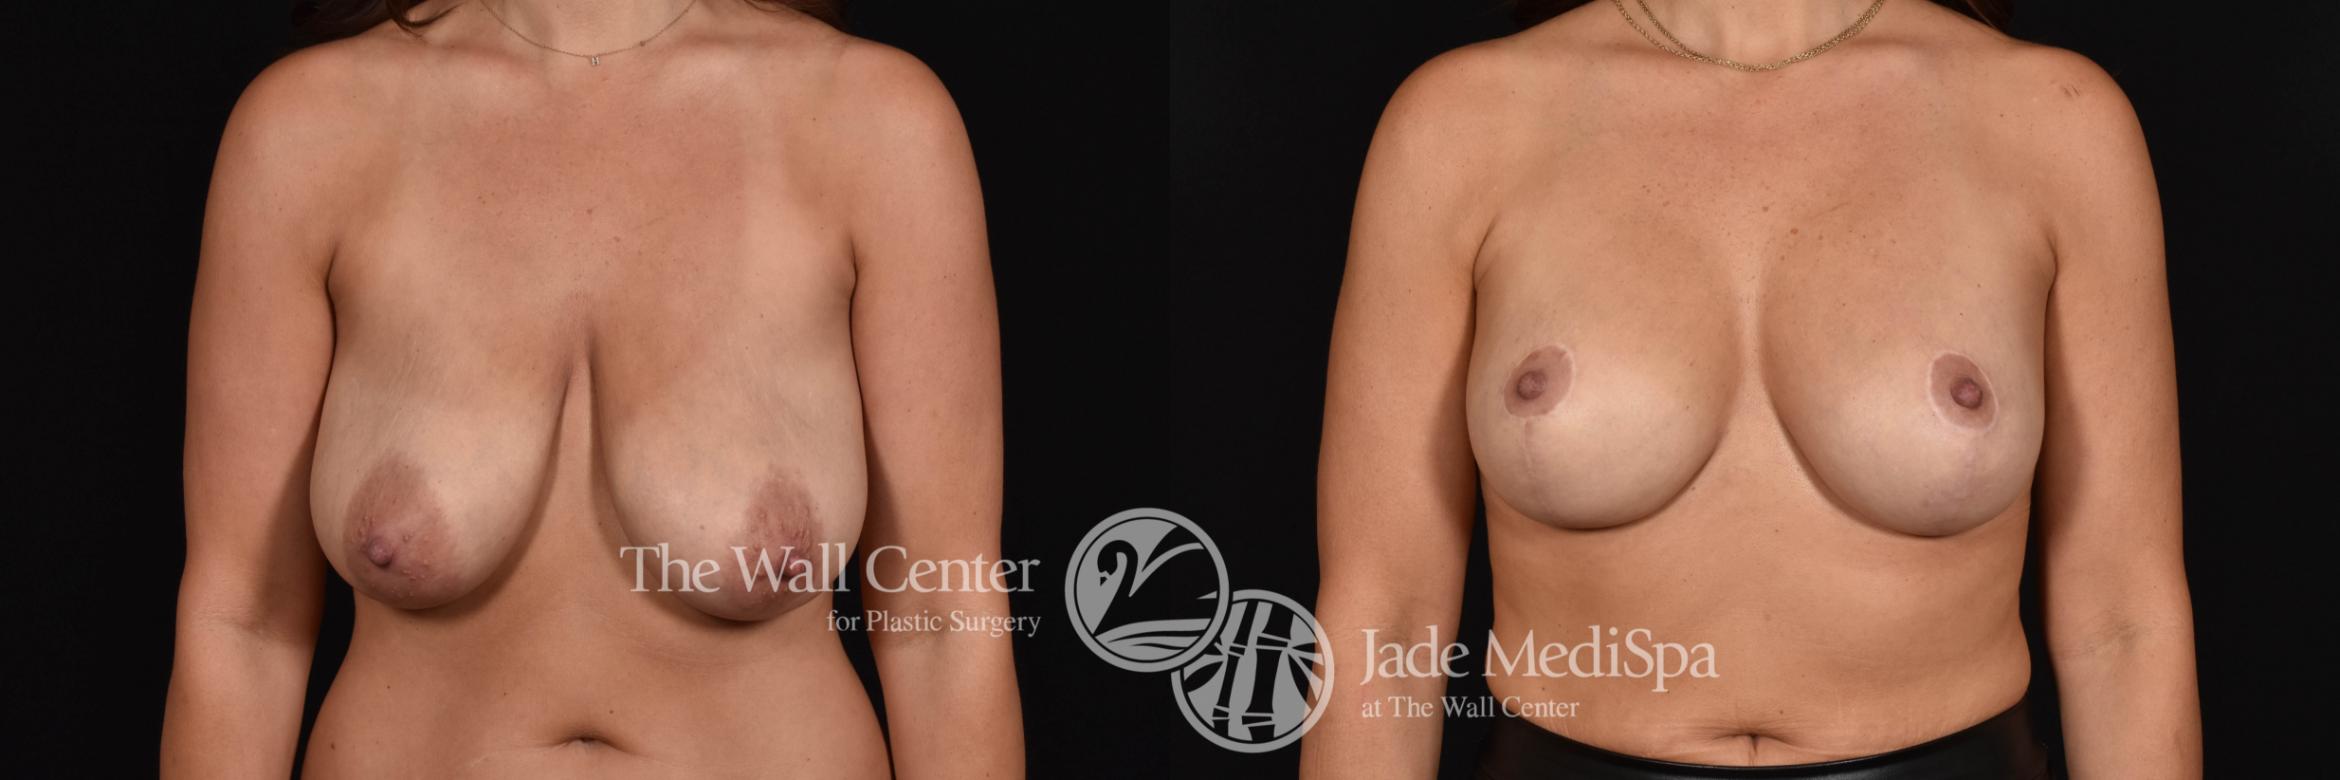 Breast Aug with Lift Front Photo, Shreveport, Louisiana, The Wall Center for Plastic Surgery, Case 830